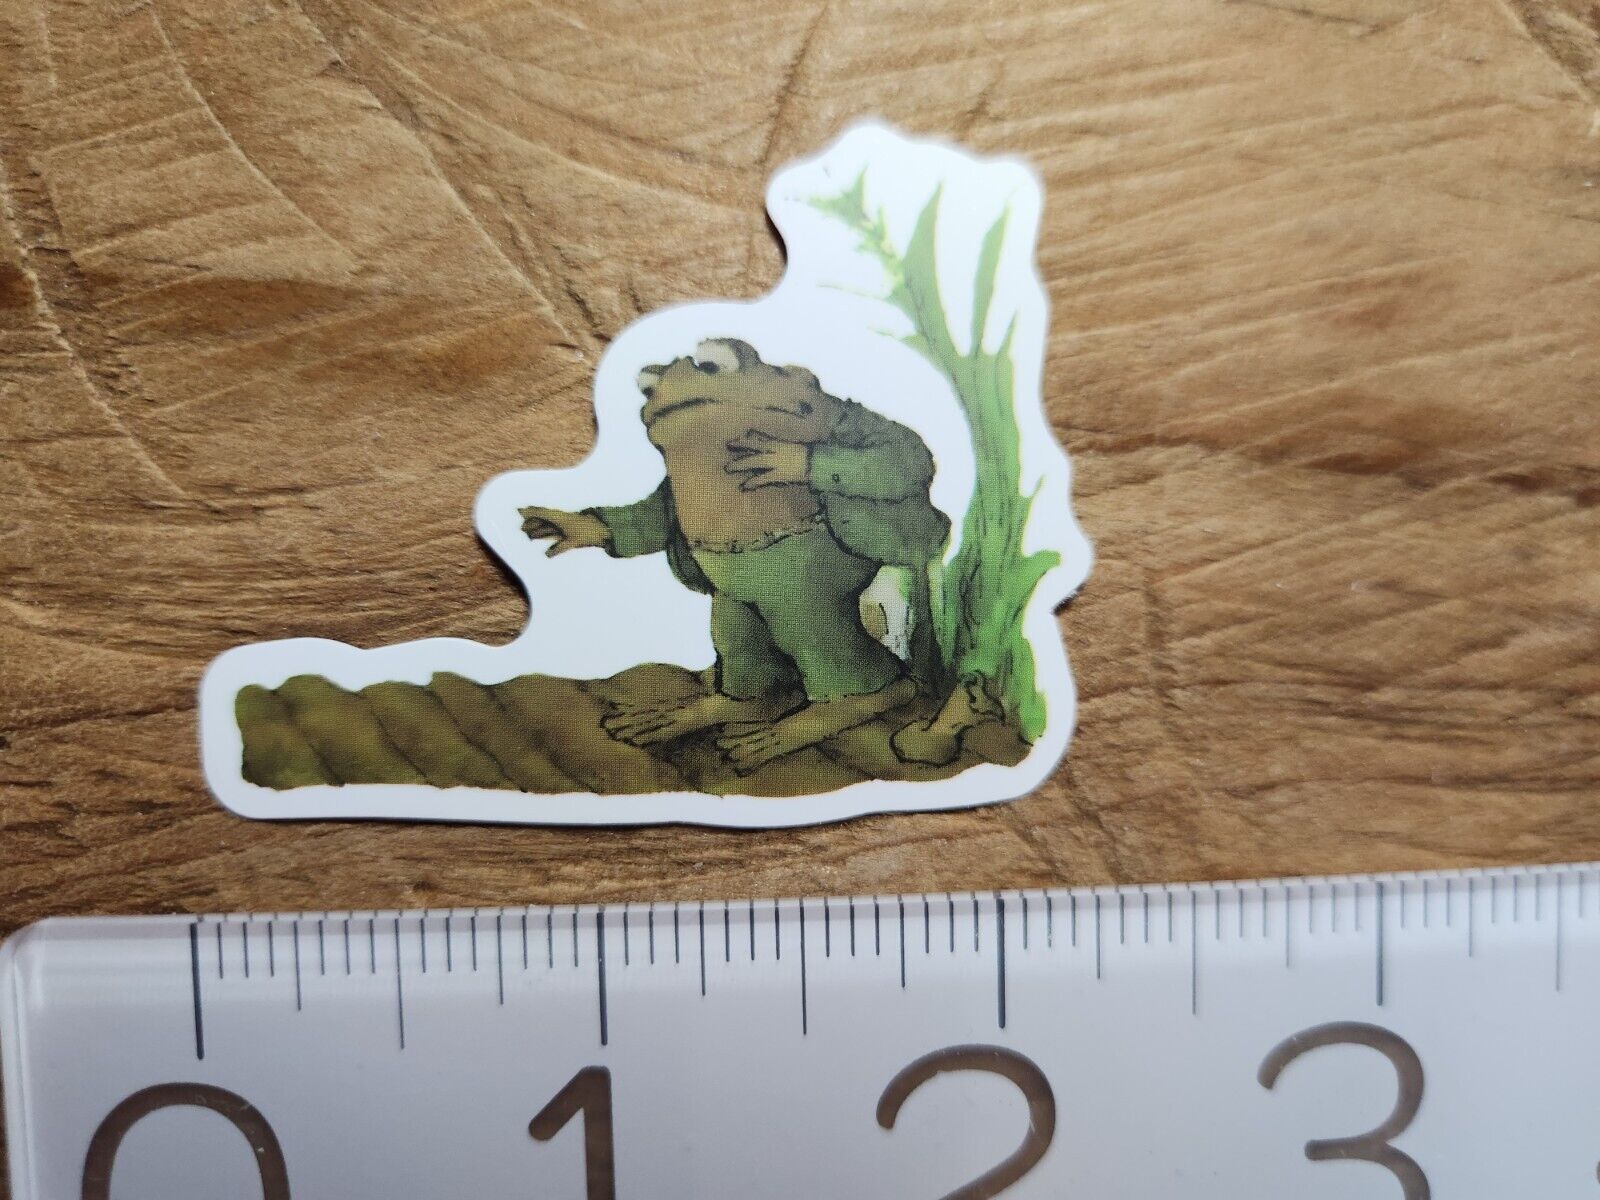 Frog and Toad Sticker Frog and Toad Decal Frog and Toad Together 80s Kids Book